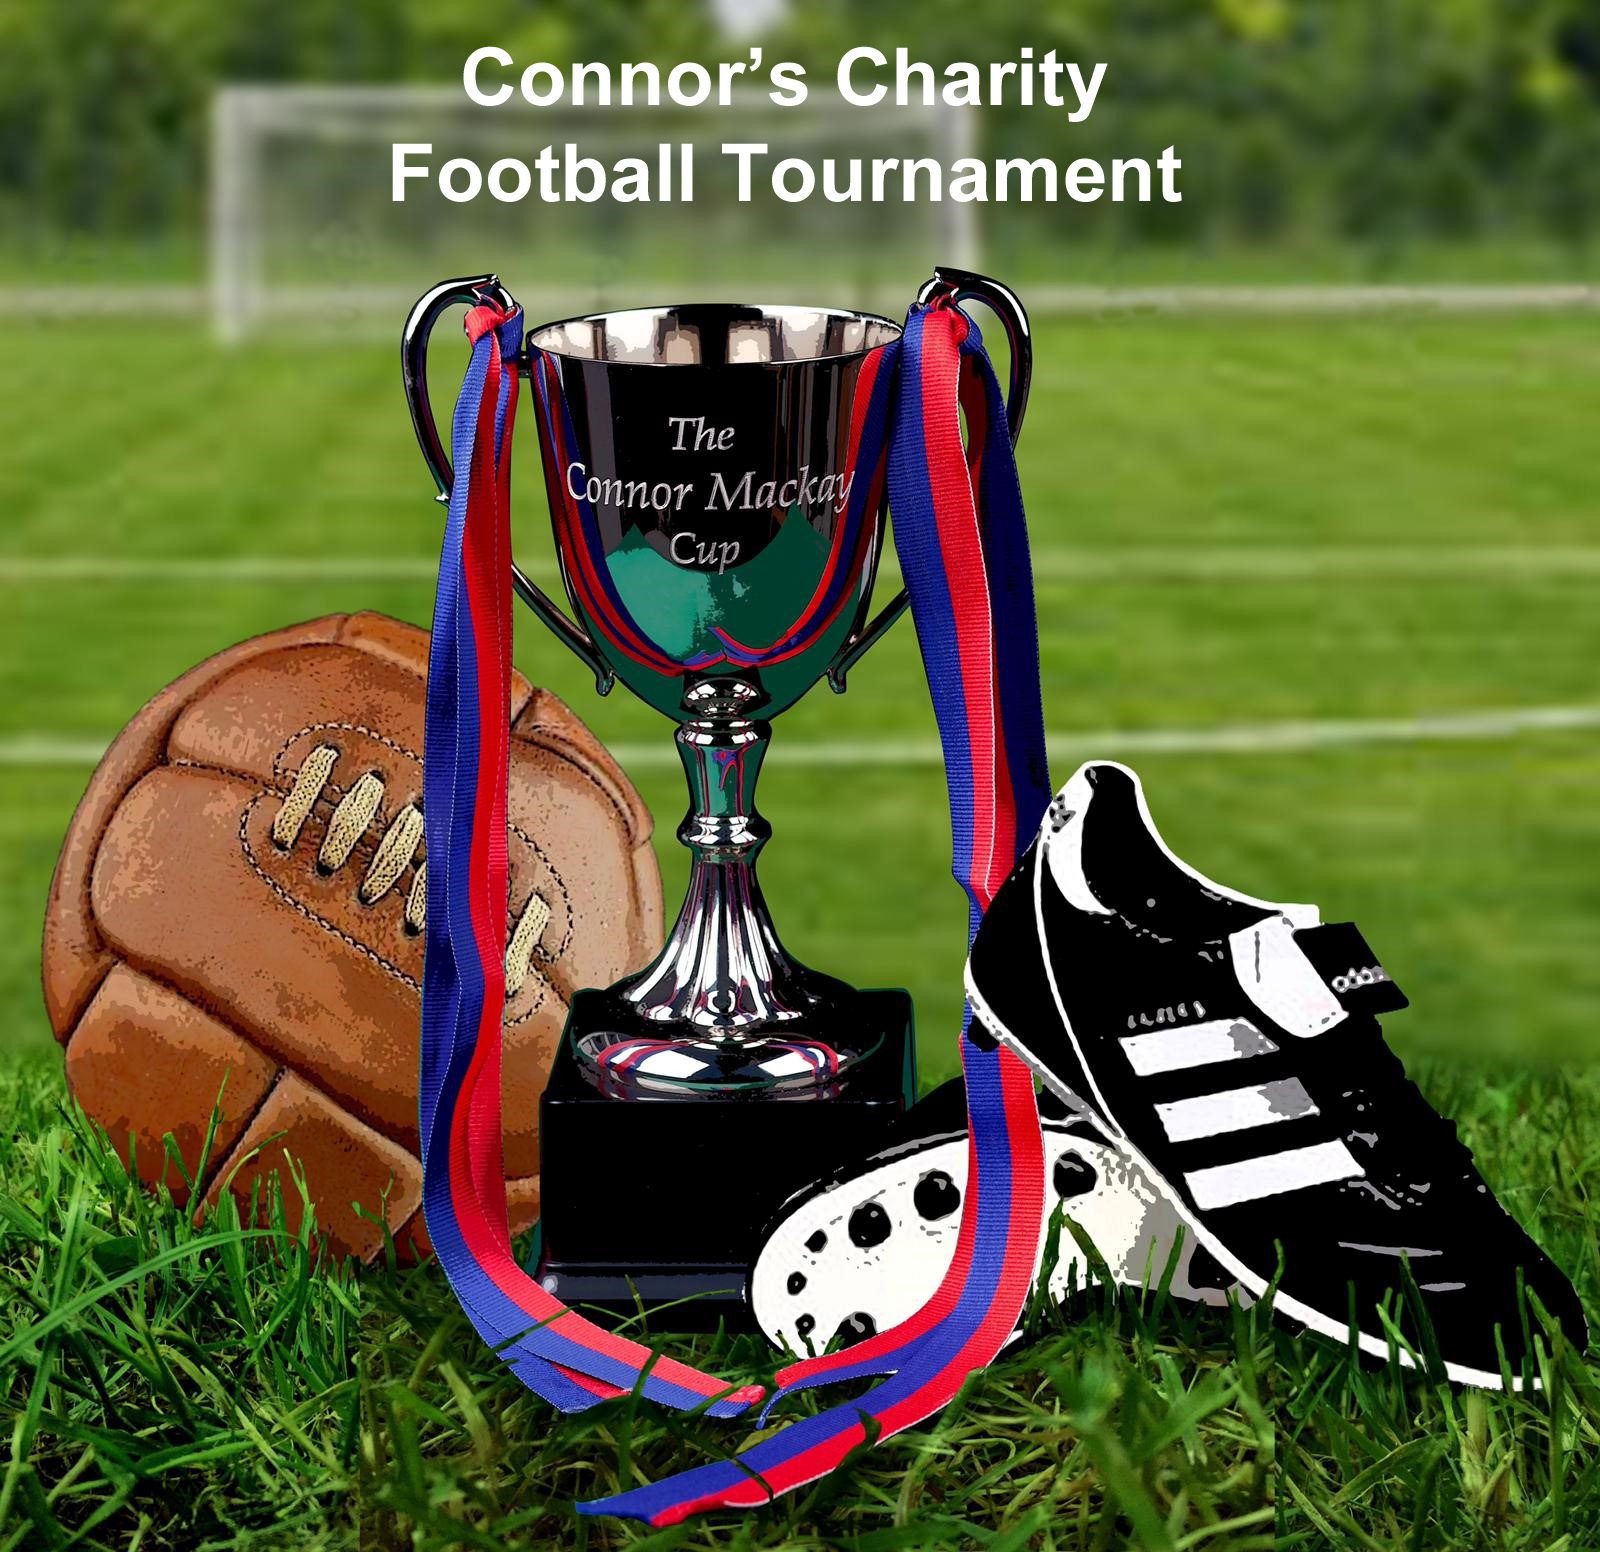 Raising money with a charoty football tournamet for mental health